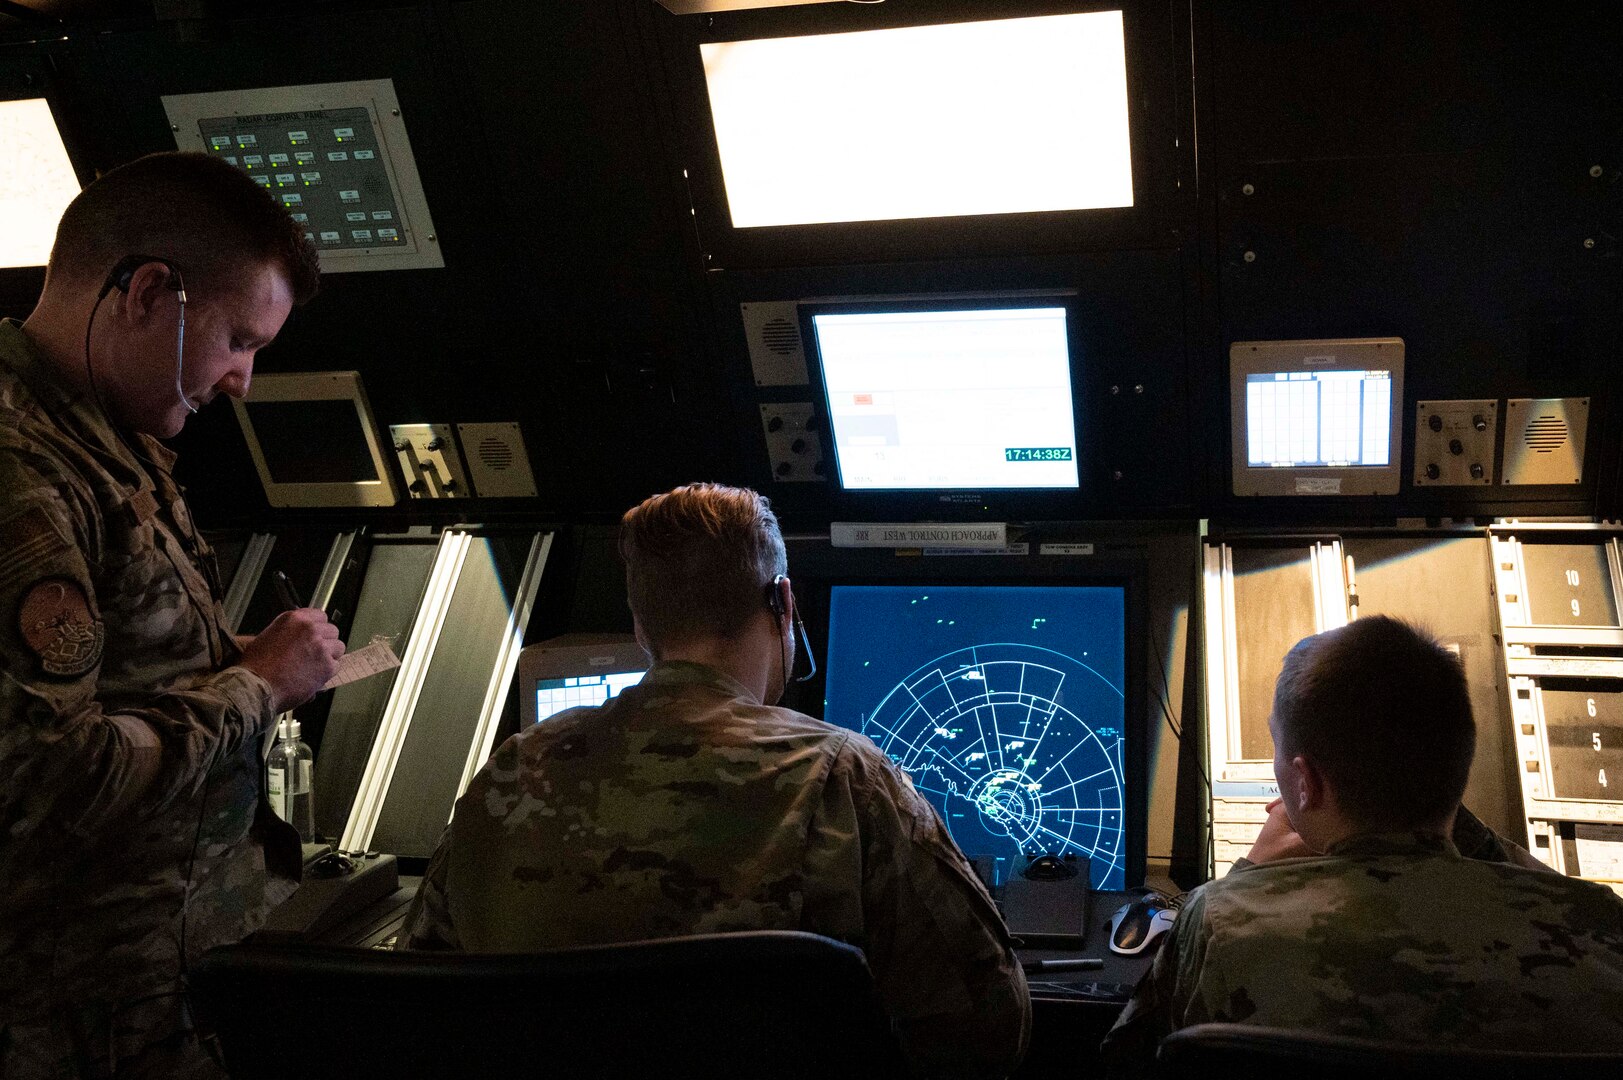 U.S. Air Force Senior Airman Robert Taggart (left), Airman 1st Class Christopher Morley (middle), and Airman 1st Class Caze Bradley (right), 47th Operations Support Squadron air traffic controllers, work together during a simulated air traffic control session at Laughlin Air Force Base, Texas, May 4, 2022. This simulator allows Airmen to train for day-to-day air traffic scenarios without the stress of real-world situations.